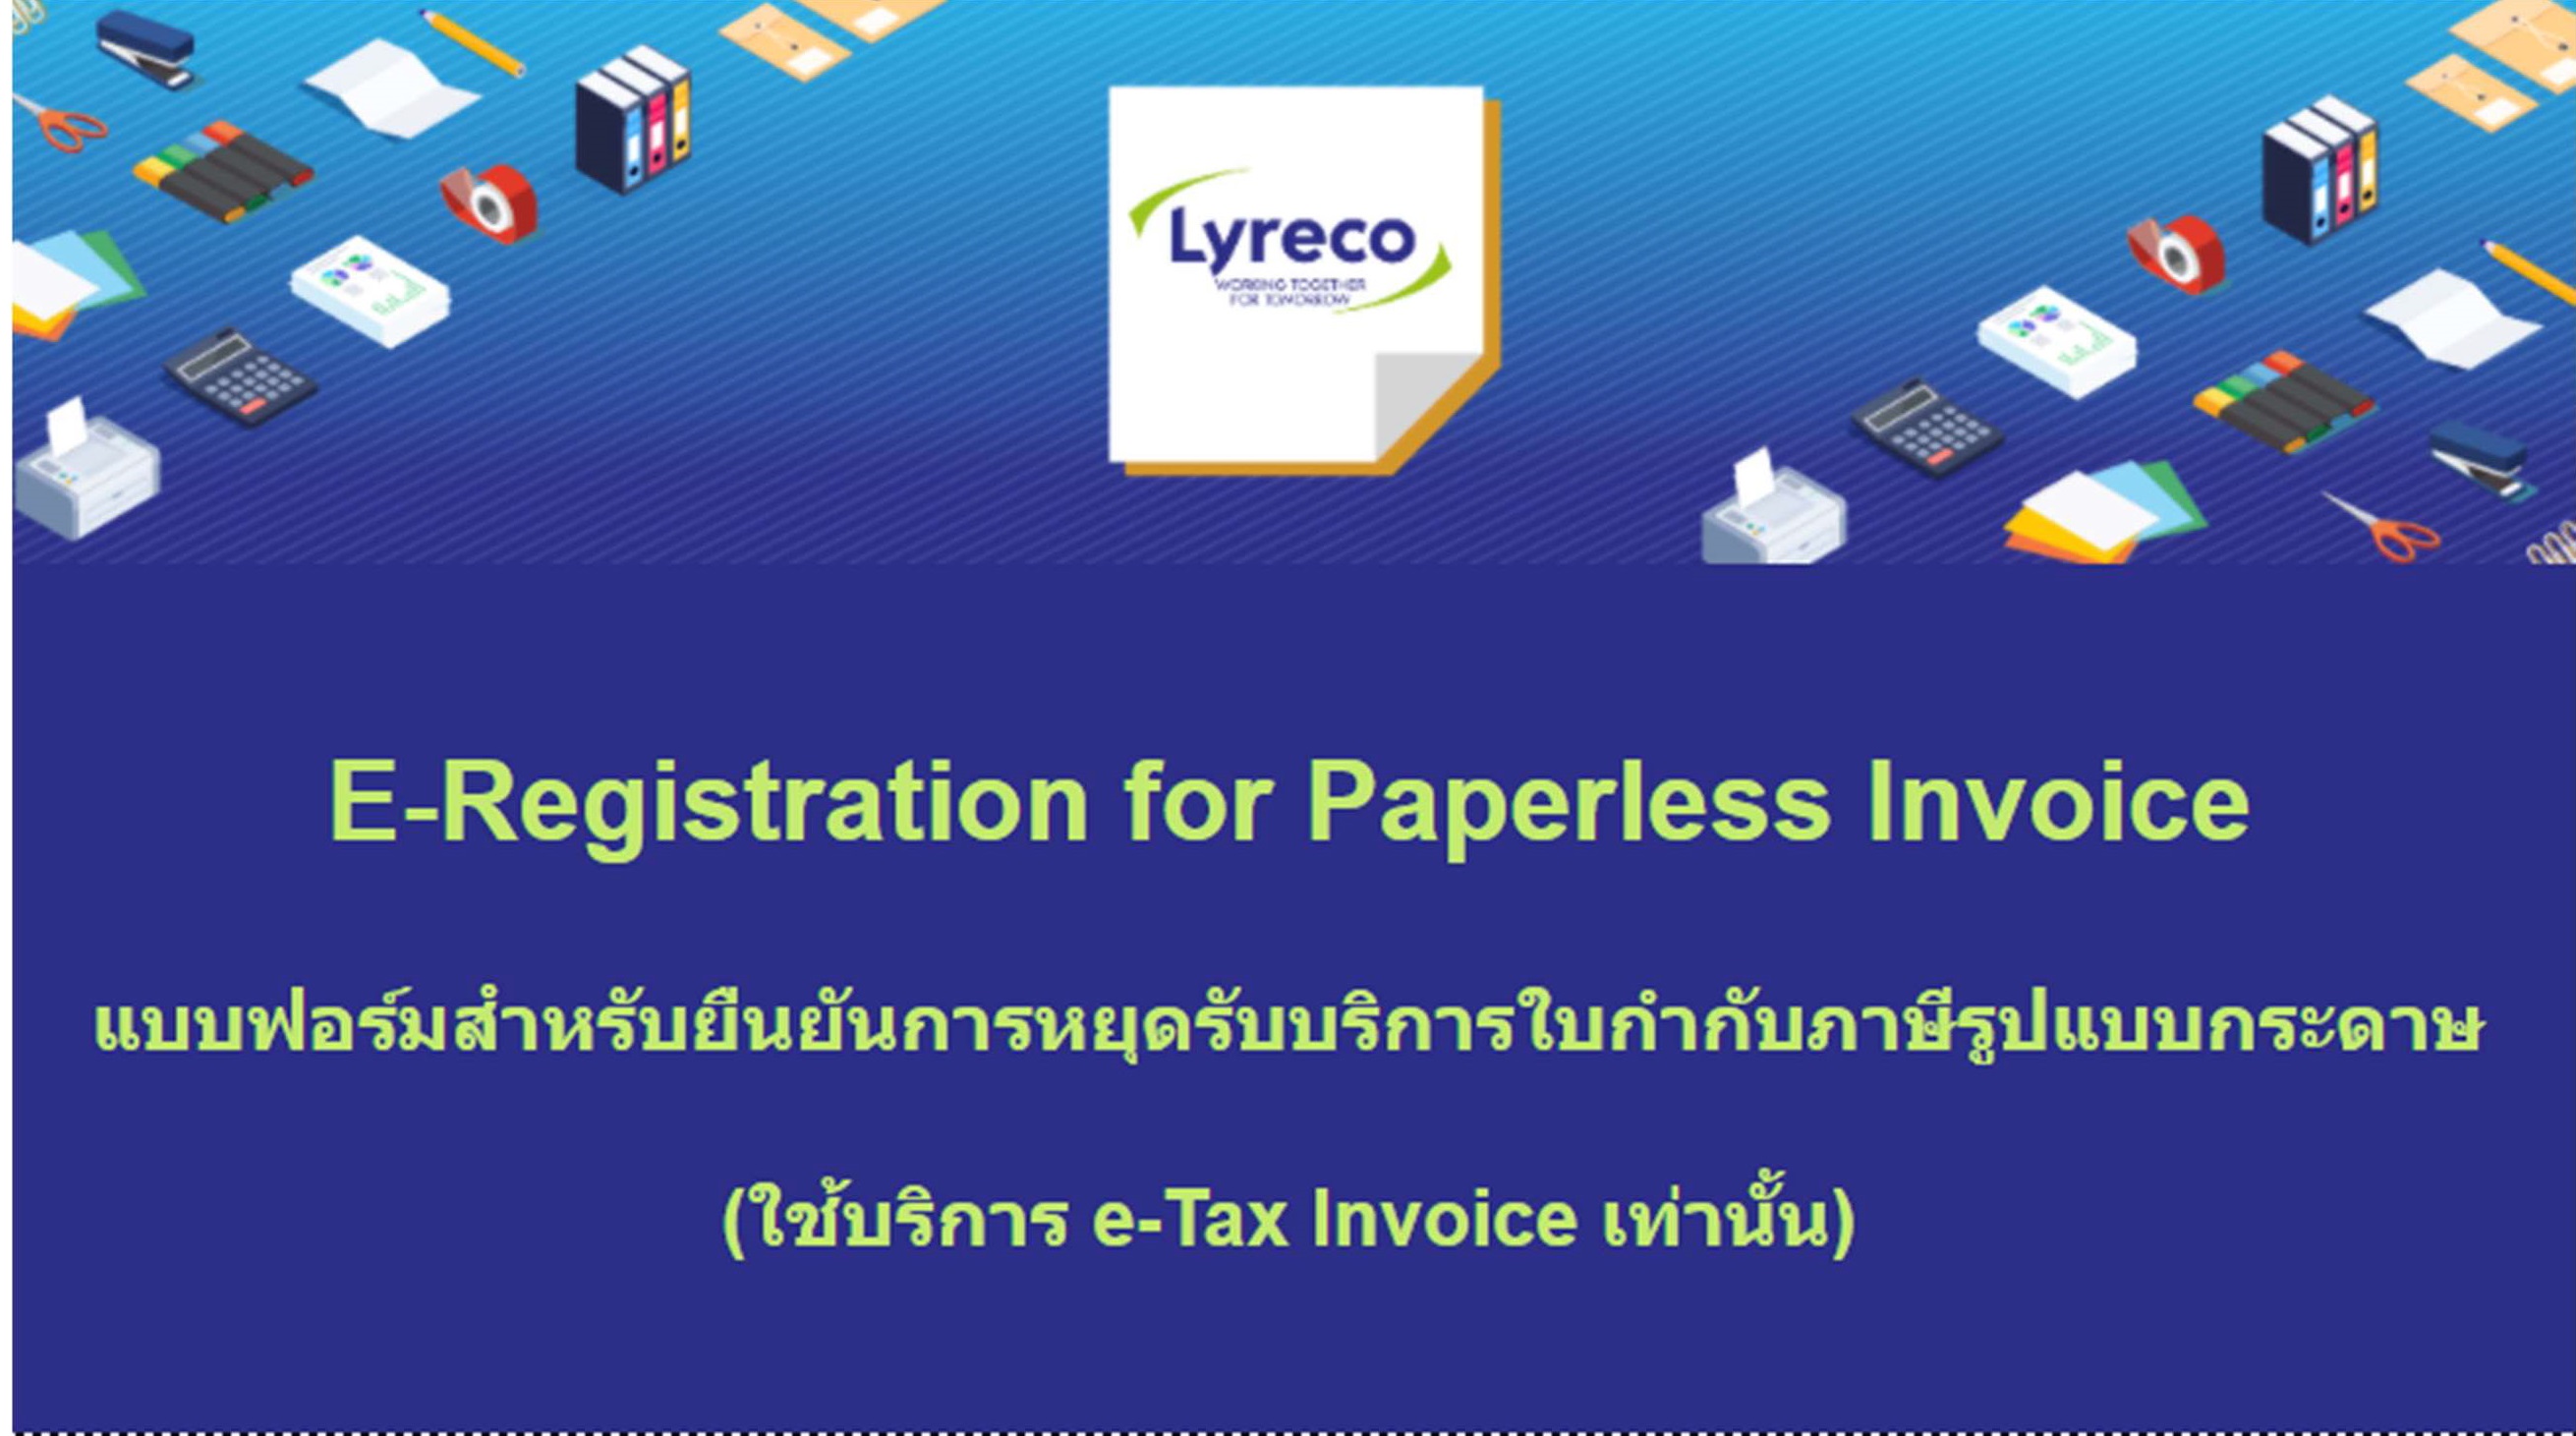 Lyreco Registration for Paperless Invoice